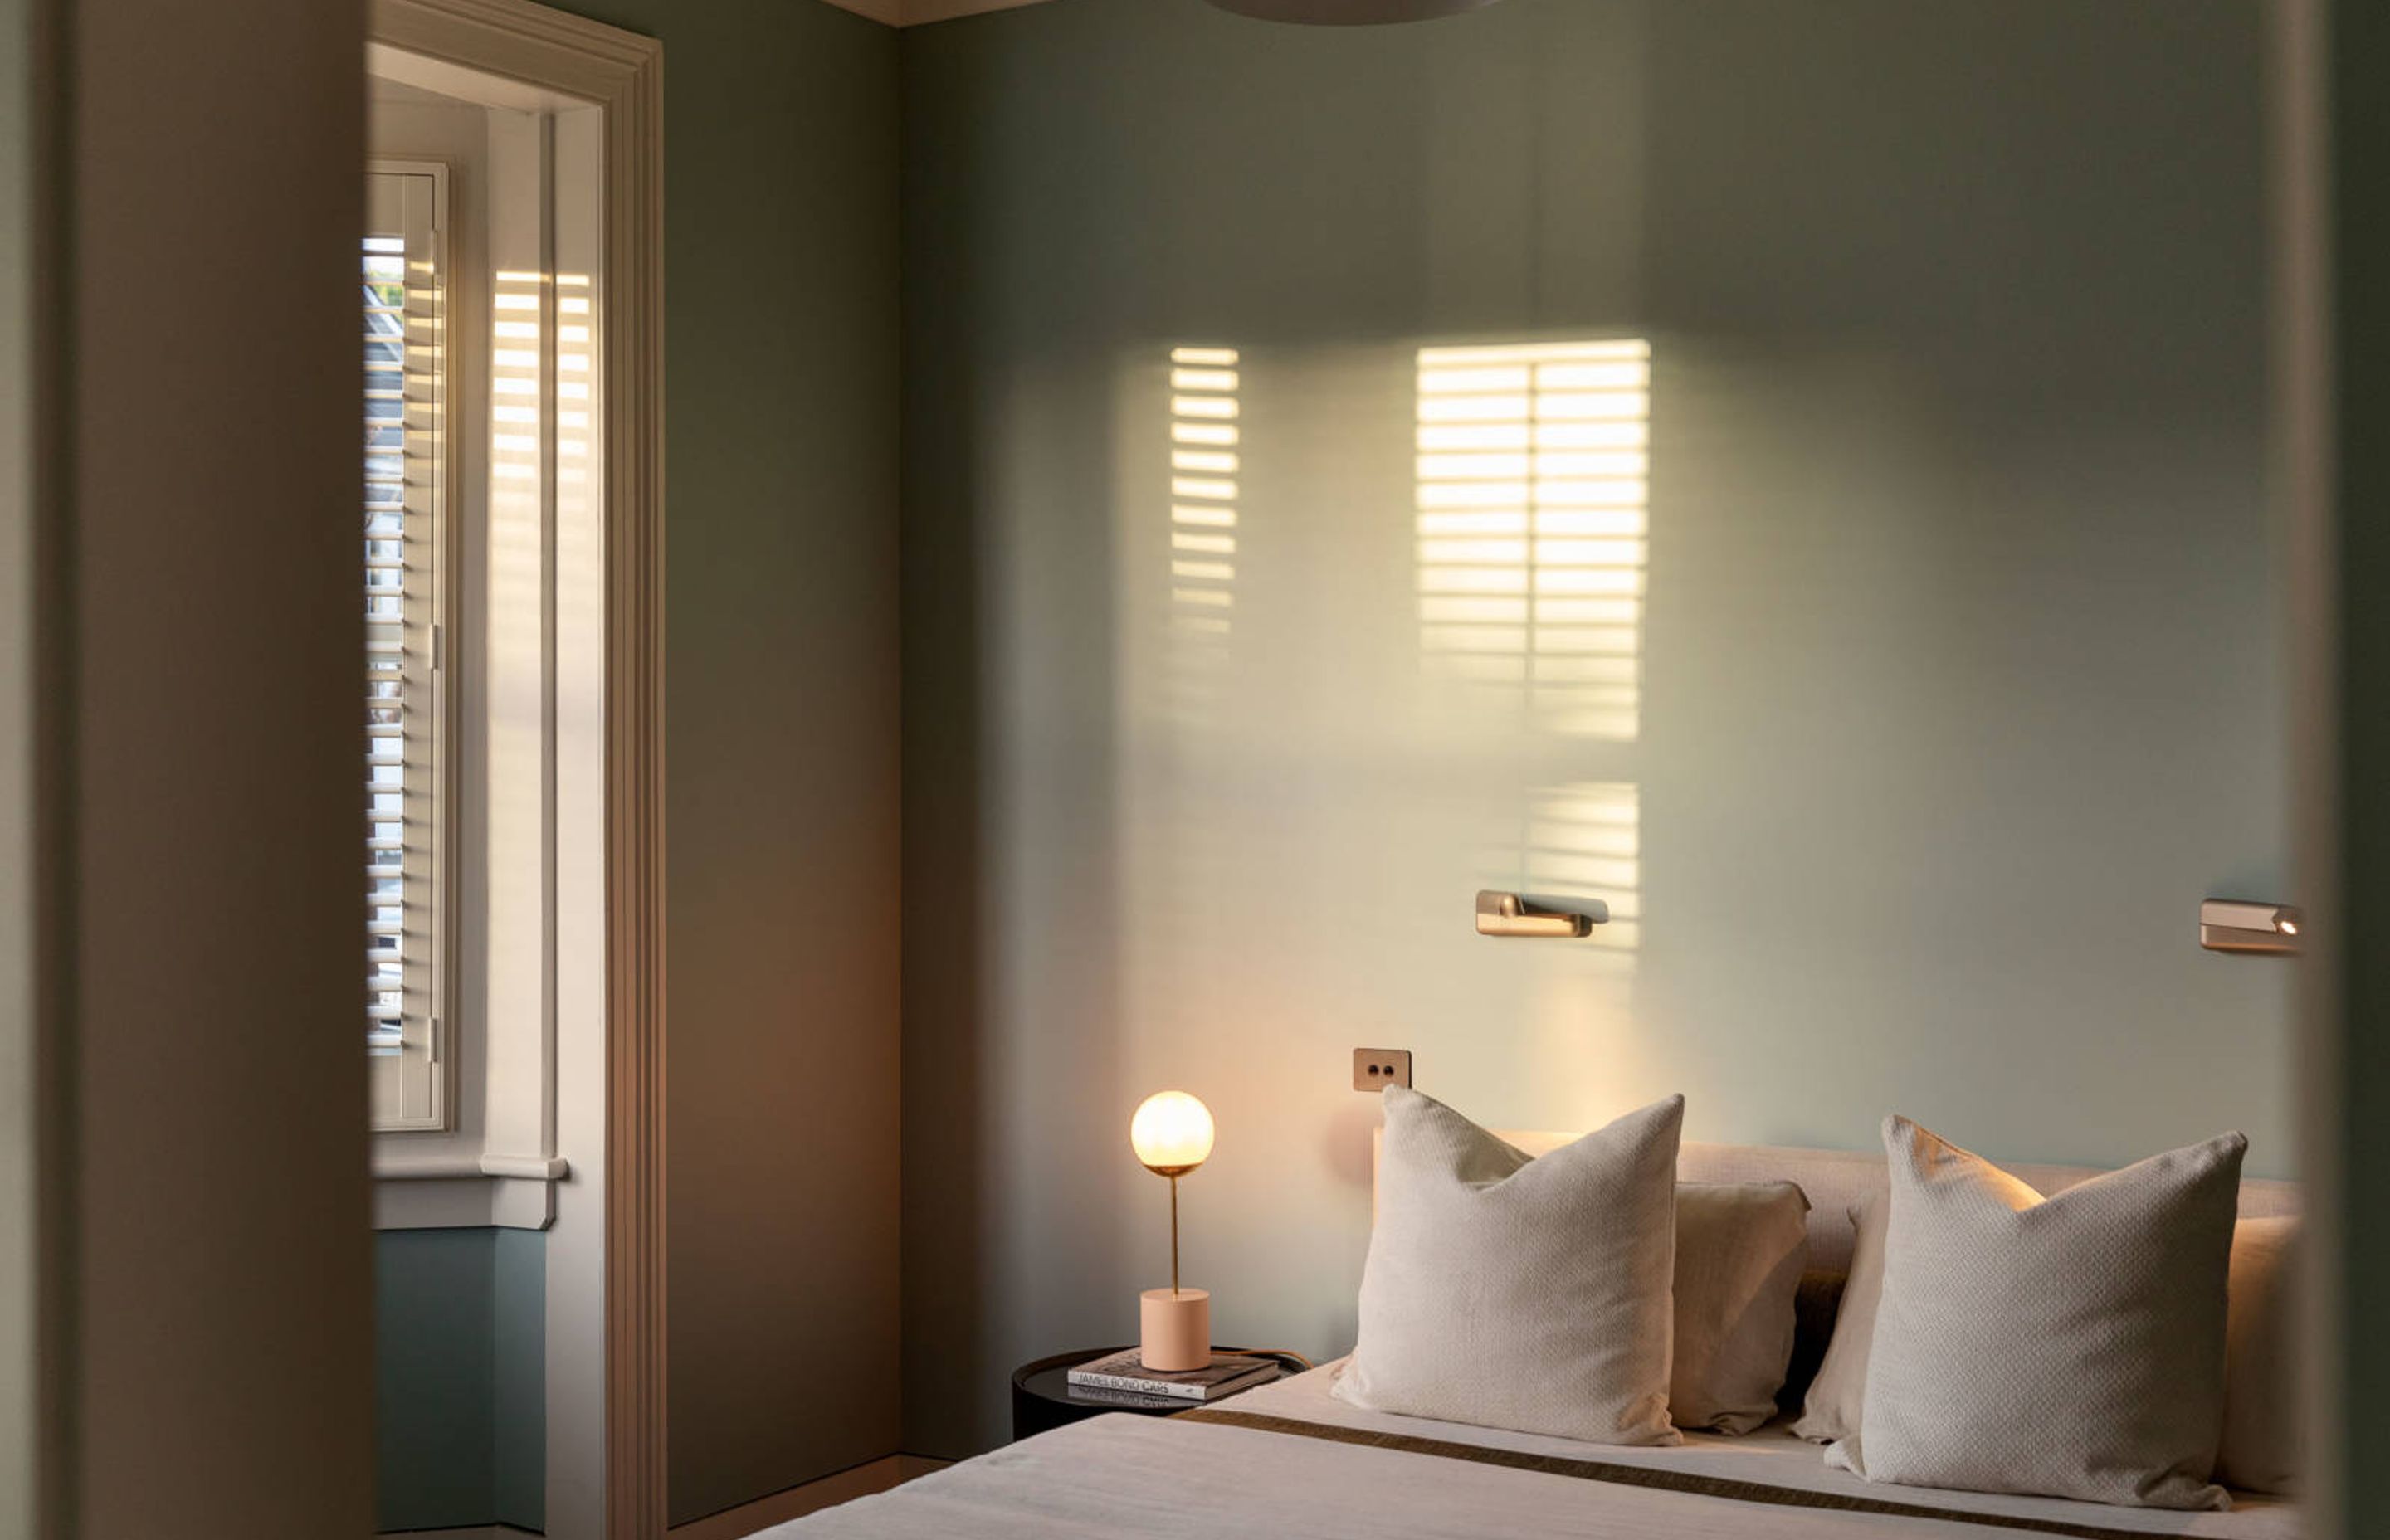 A master bedroom in the original villa features soft green walls that tie in with the exterior paint colour.